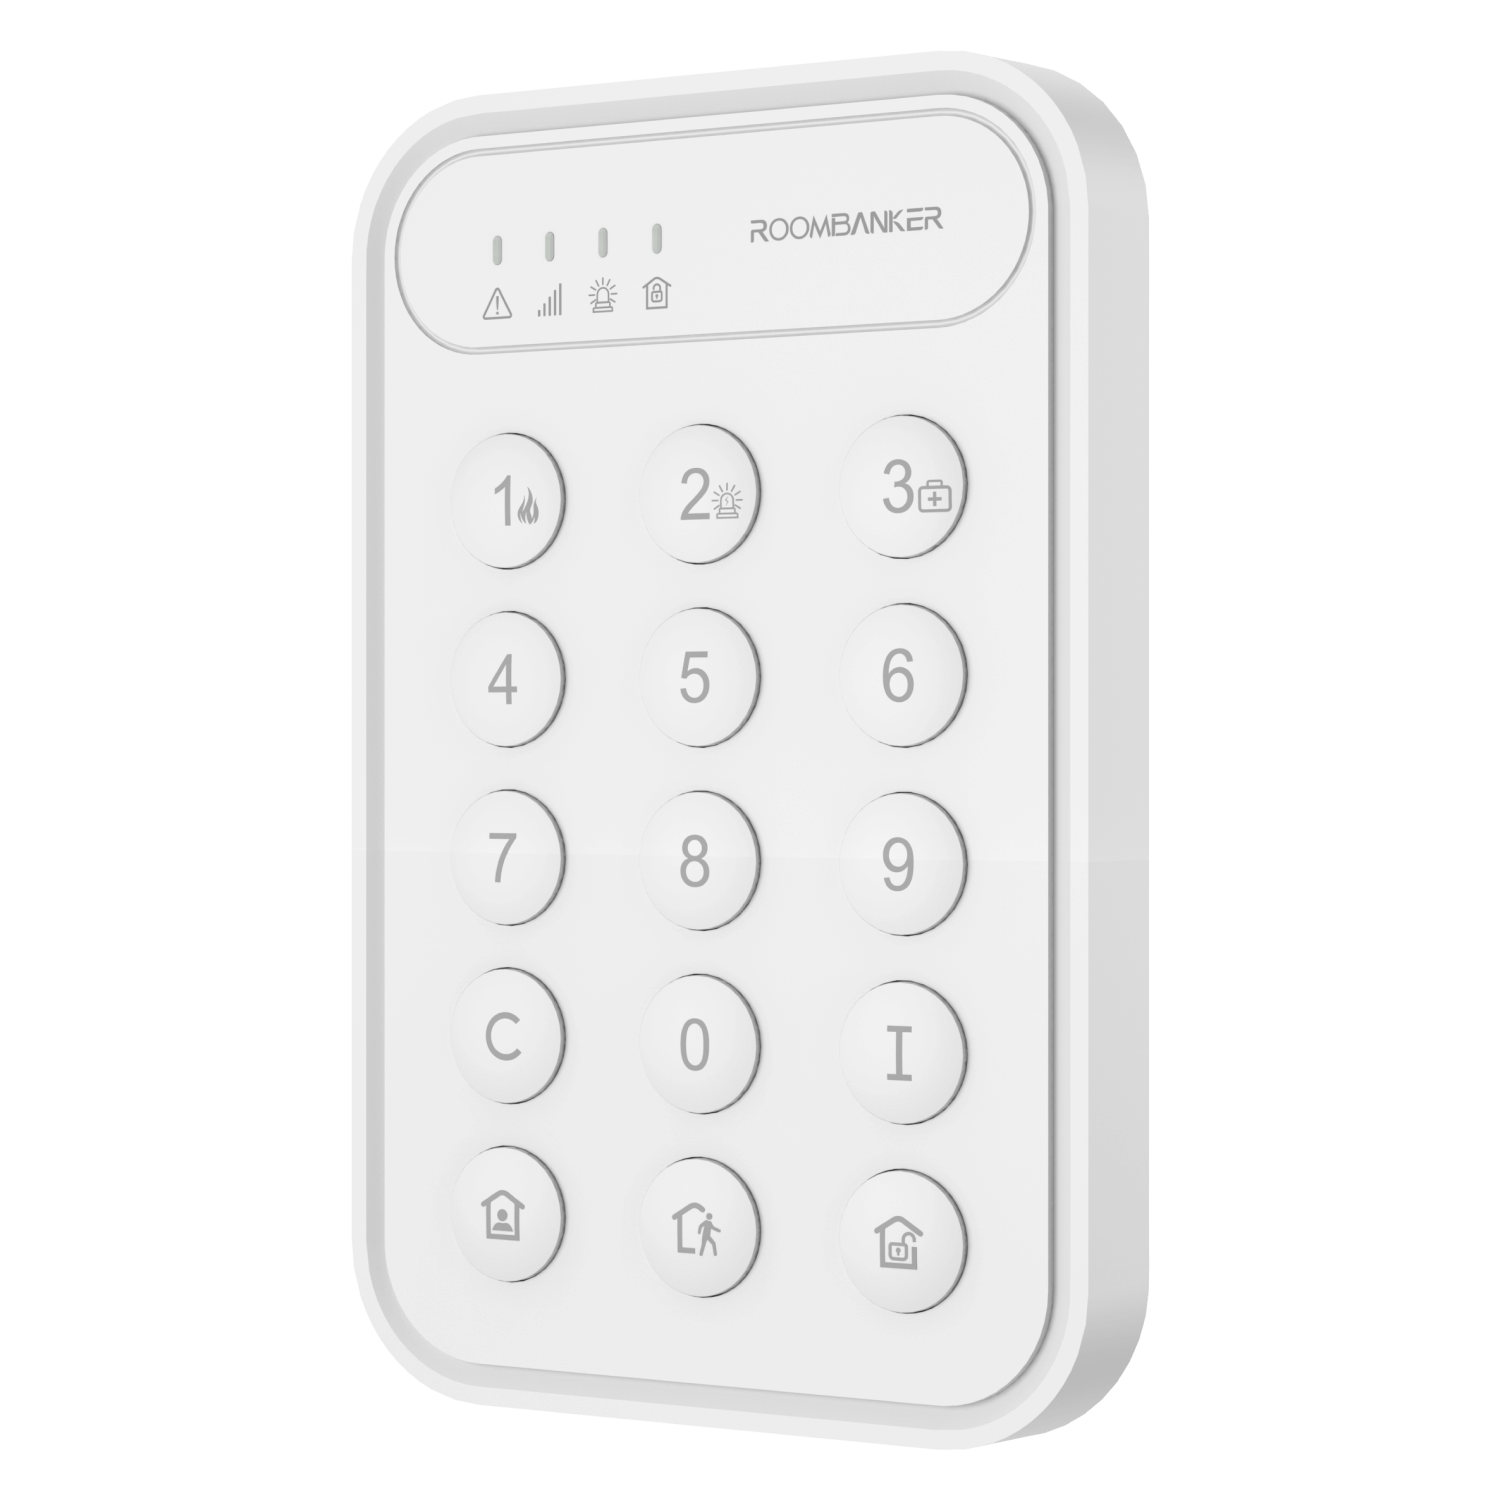 Keypad with One-Click Arming/Disarming, Advanced Encryption, Long-Range Communication - Requires Roombanker Hub